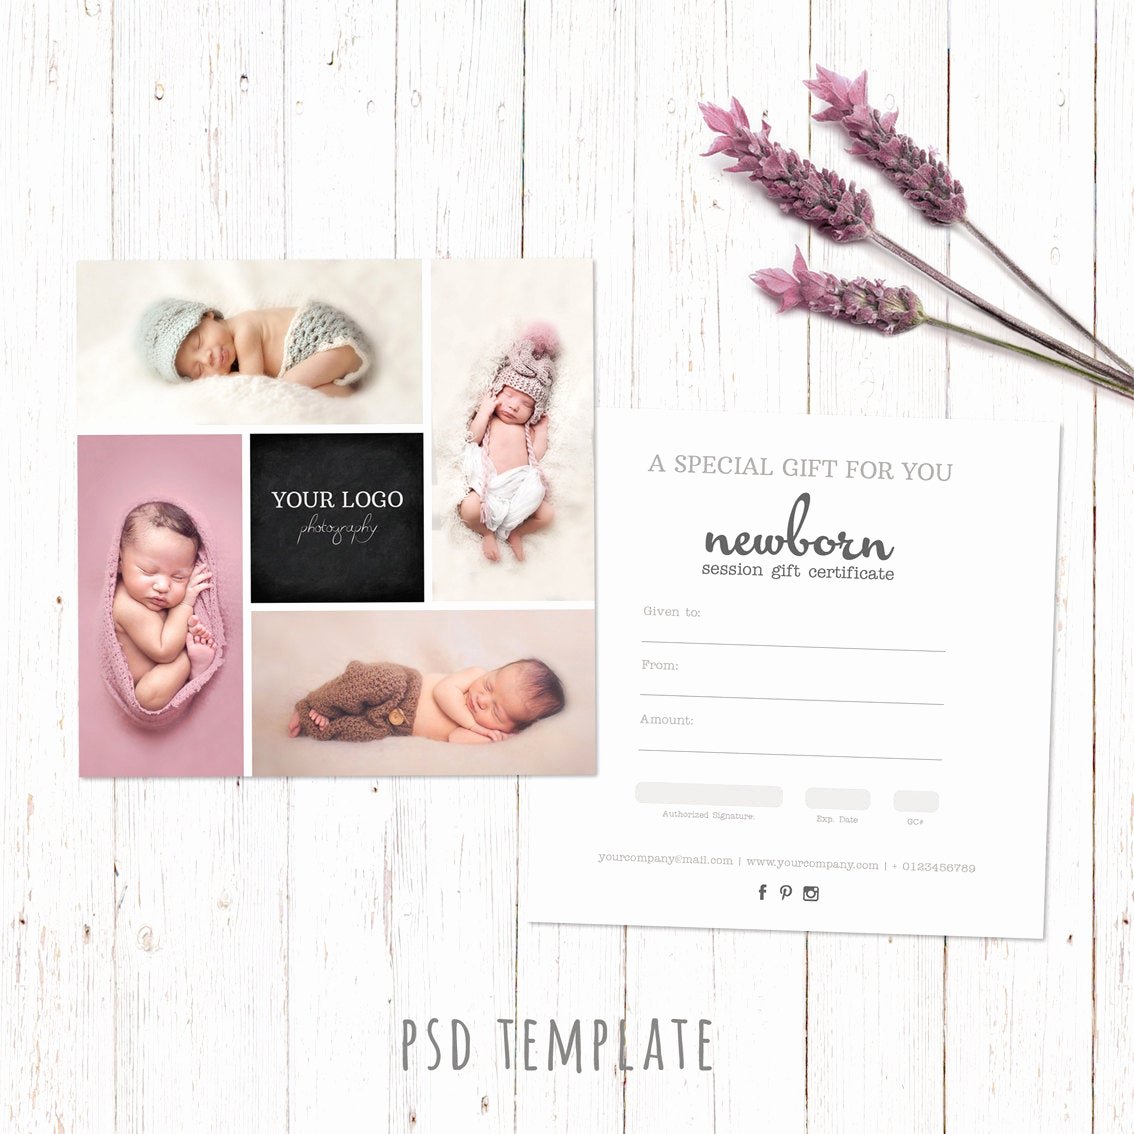 Gift Certificate for Photography Session Inspirational Gift Certificate Template Newborn Session Photography T